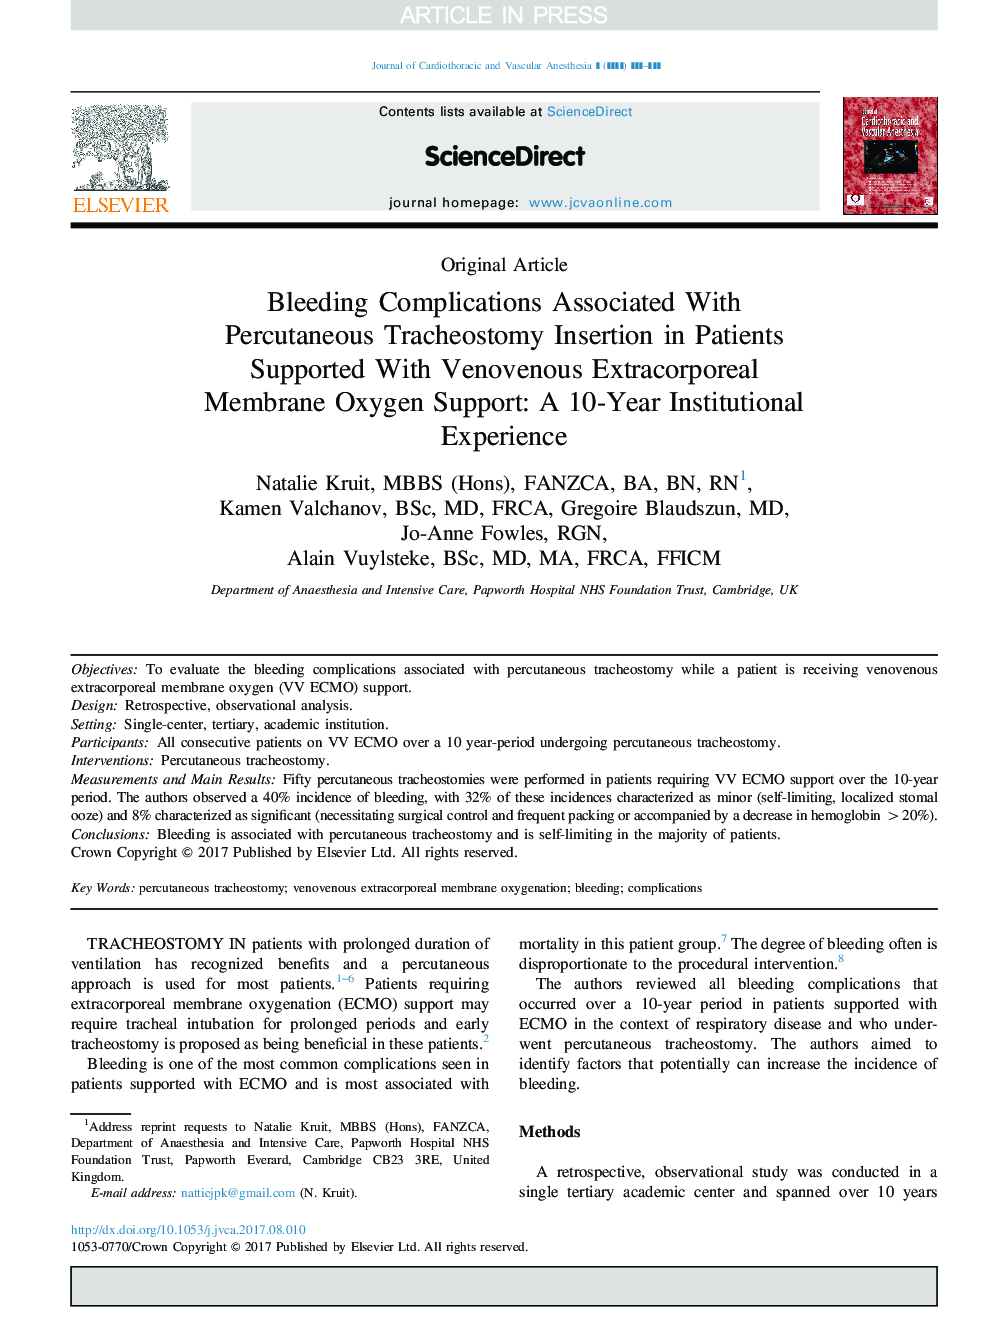 Bleeding Complications Associated With Percutaneous Tracheostomy Insertion in Patients Supported With Venovenous Extracorporeal Membrane Oxygen Support: A 10-Year Institutional Experience